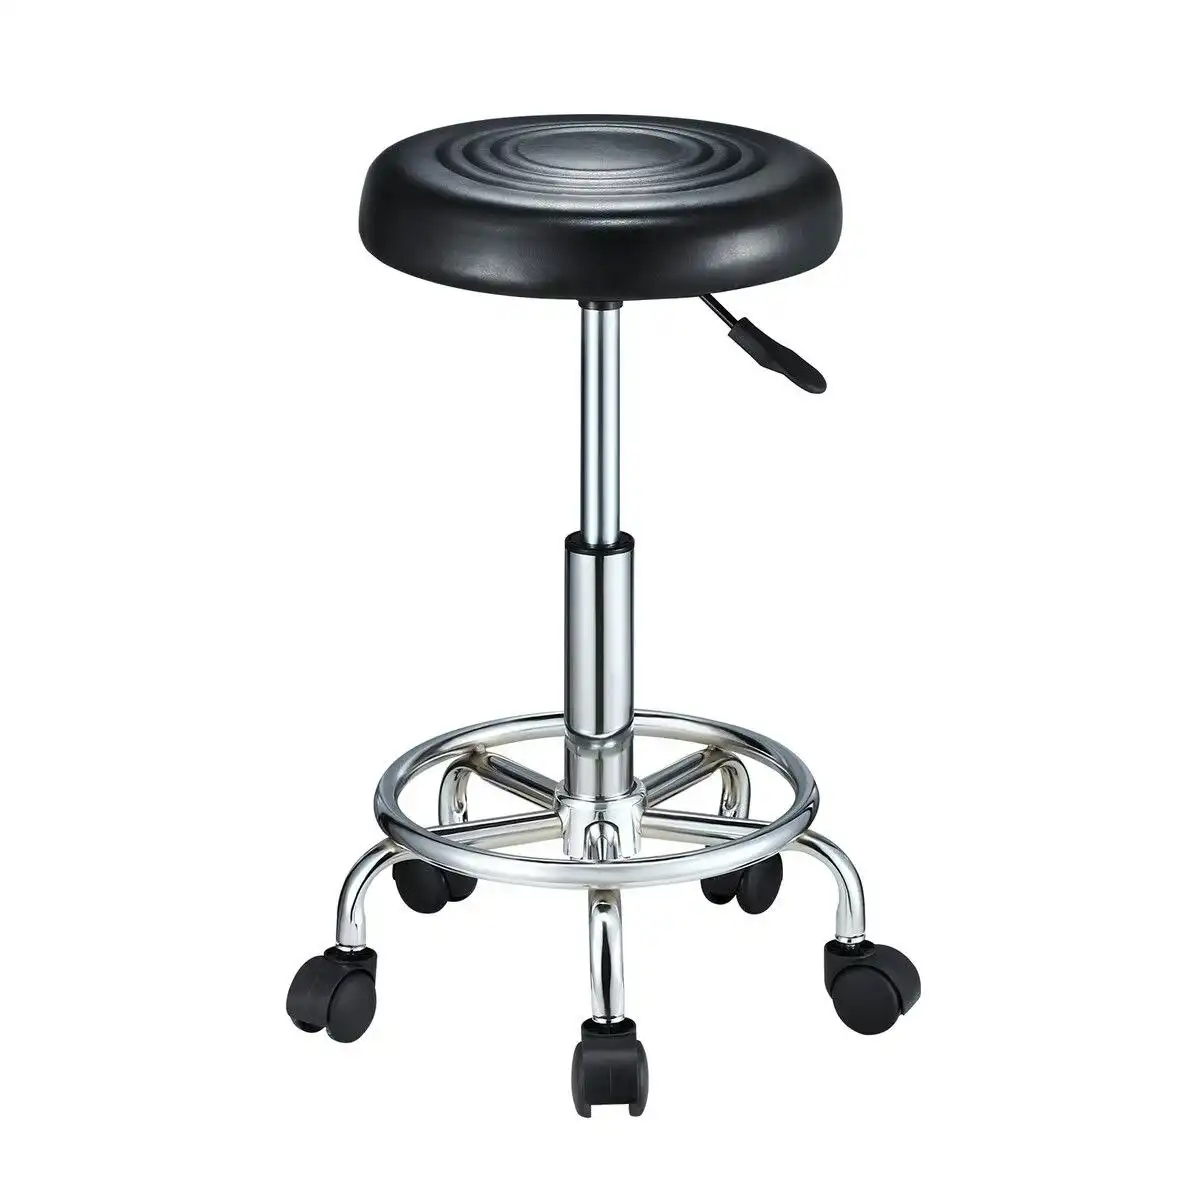 Ausway Salon Chair Barber Stool Hairdressing Beauty Clinic Height Adjustable Rotatable Round PU Black